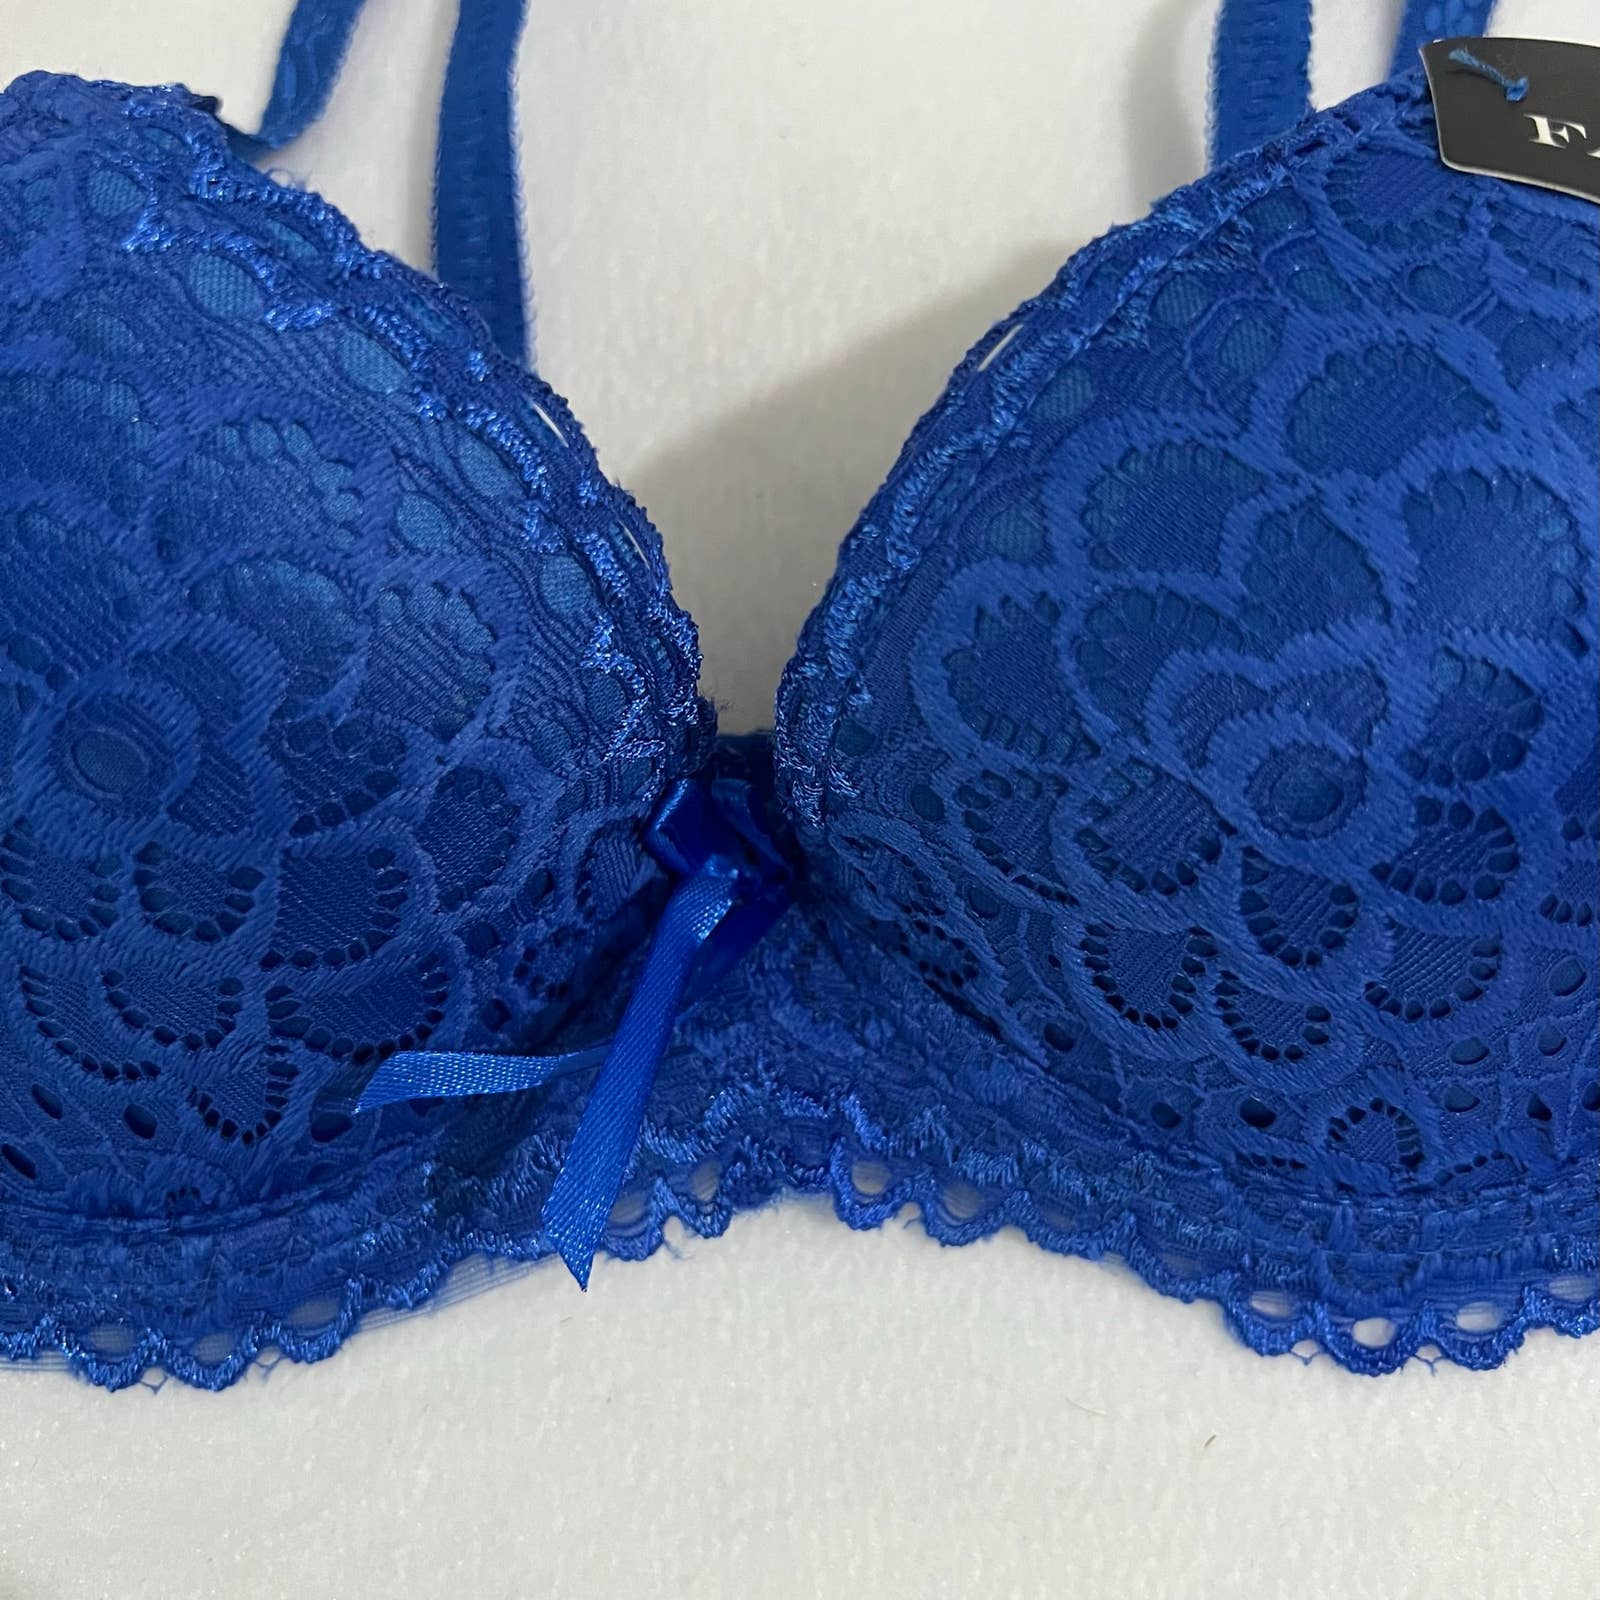 Shyle 40b Royal Blue Push Up Bra - Get Best Price from